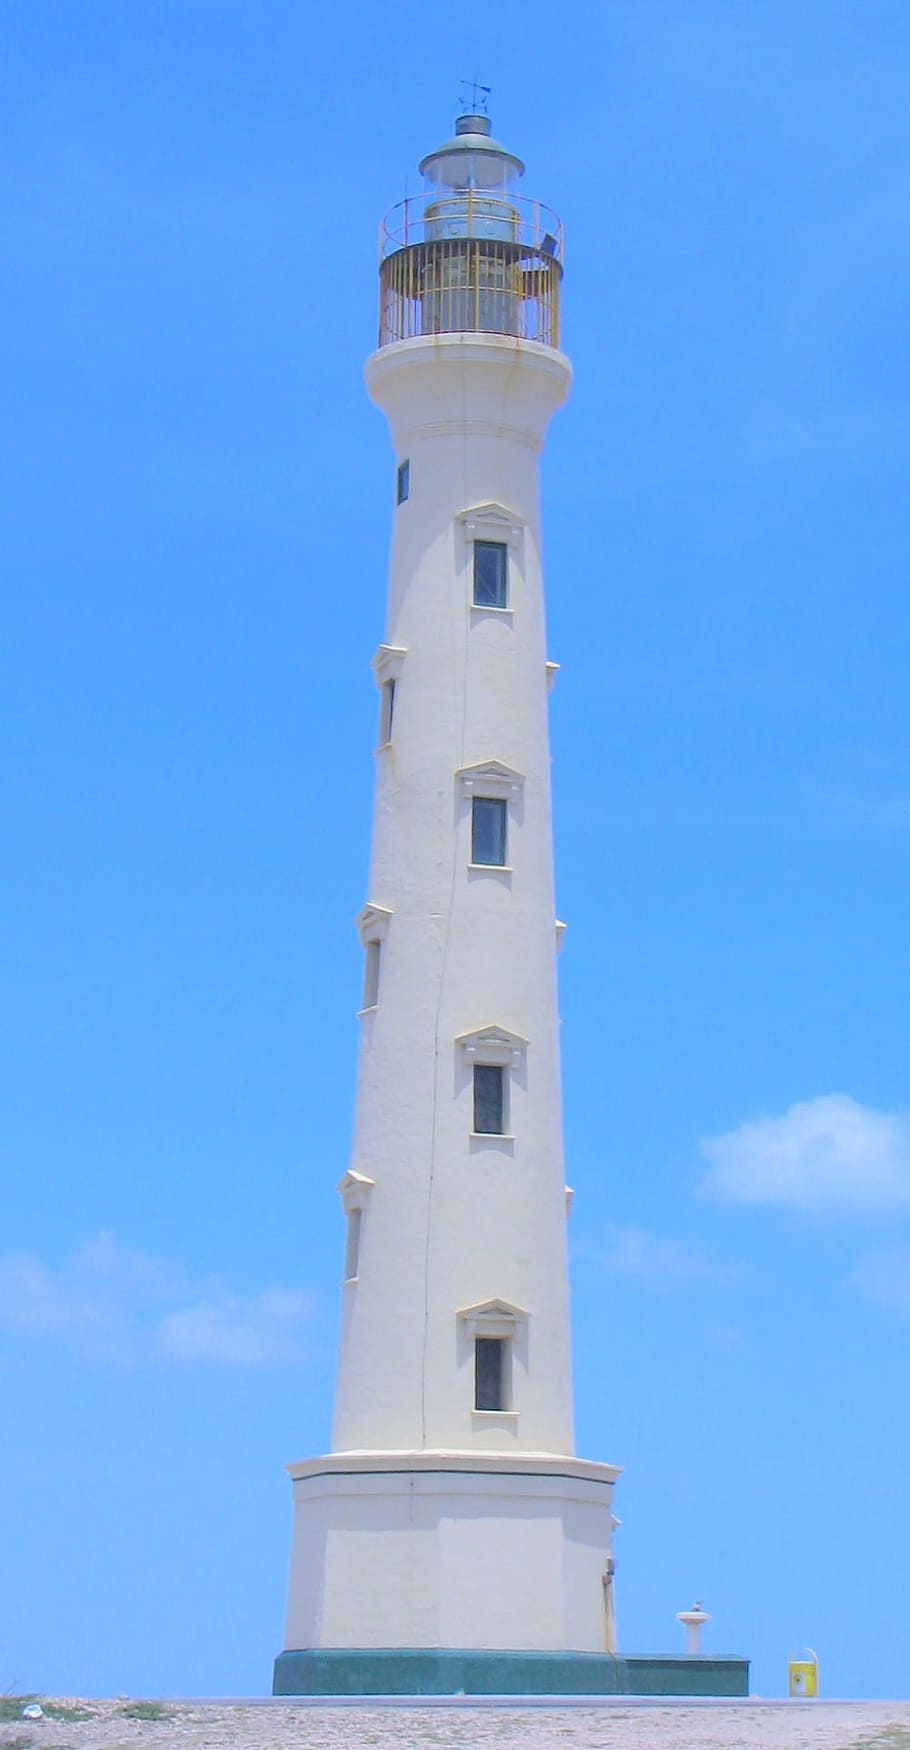 the lighthouse, california light house, aruba, tower, architecture, white, high, built structure, building exterior, guidance